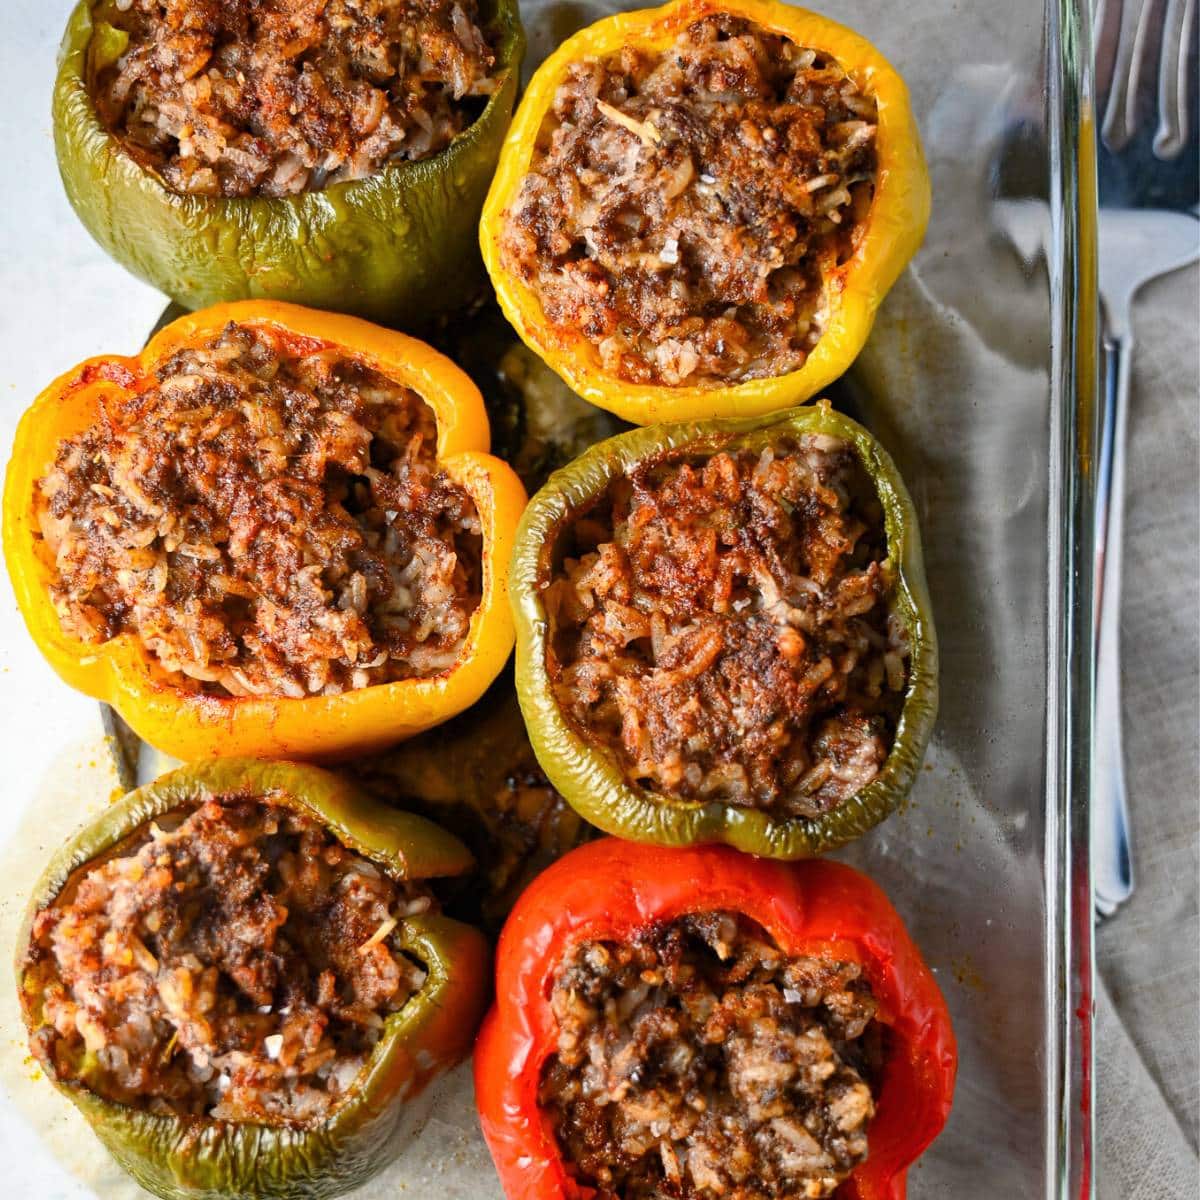 six stuffed peppers baked in a glass dish on top of a cloth napkin